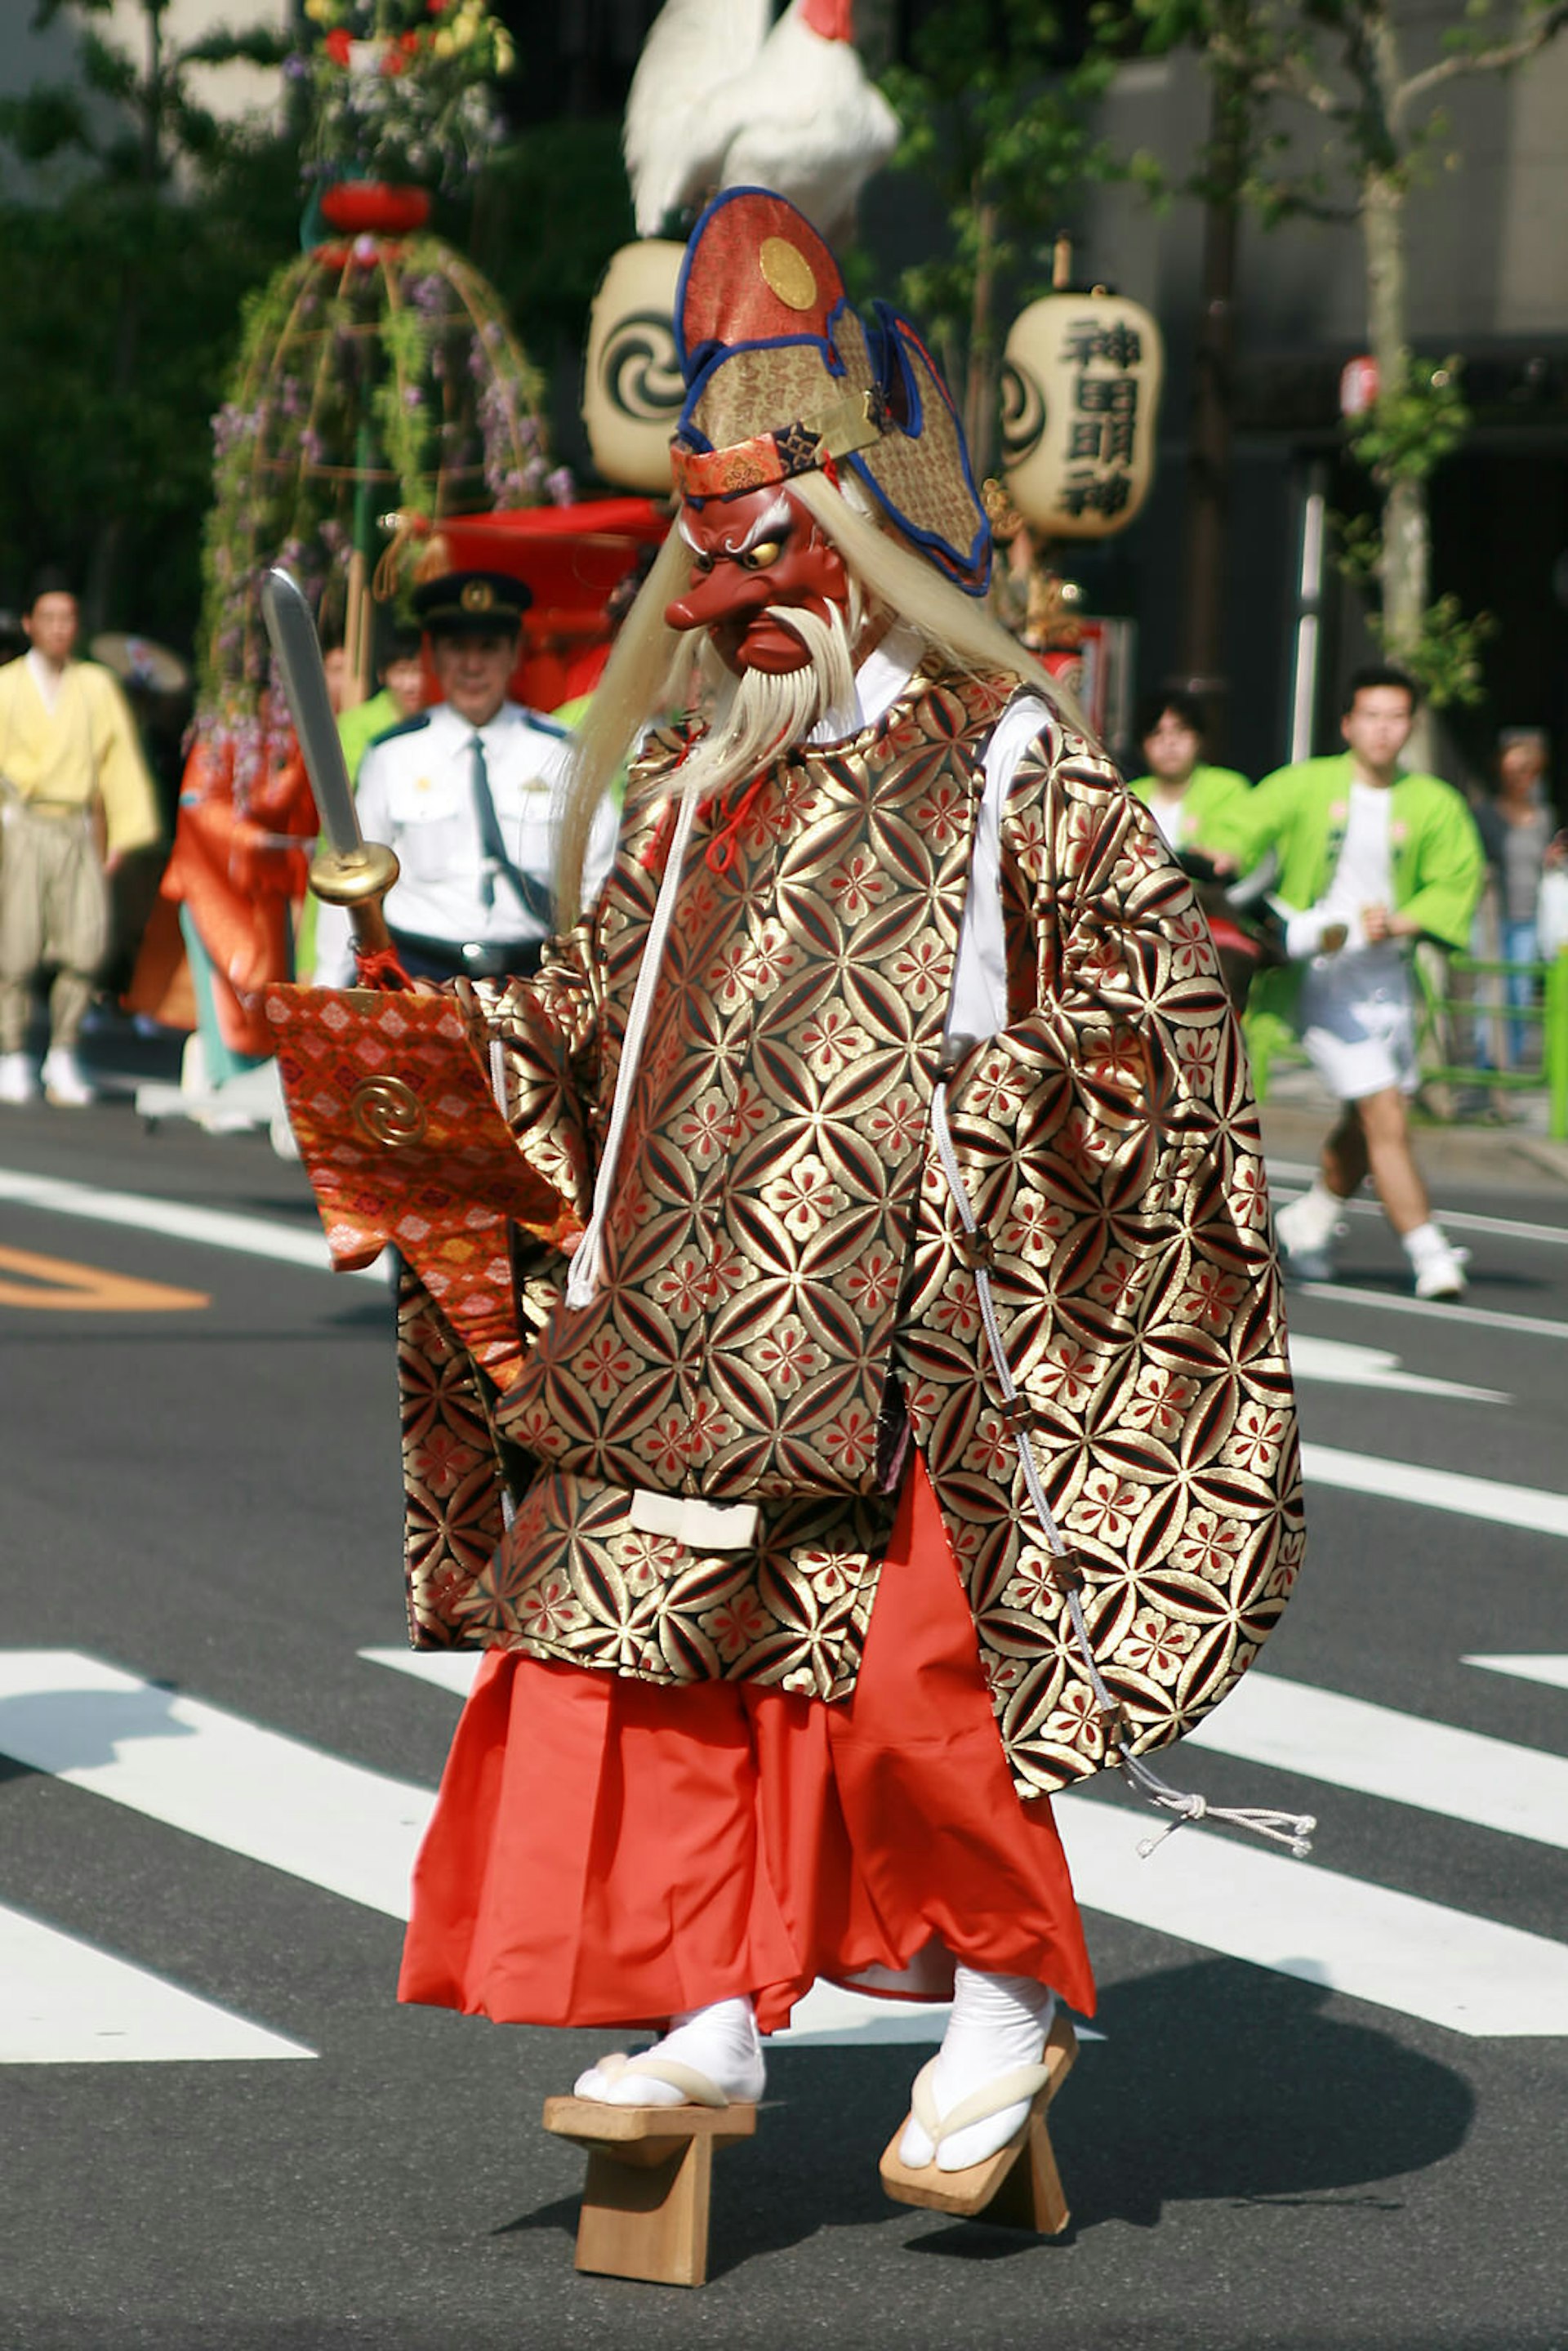 A person dressed in an elaboarate Tengū costume and mask walking across a street in Japan